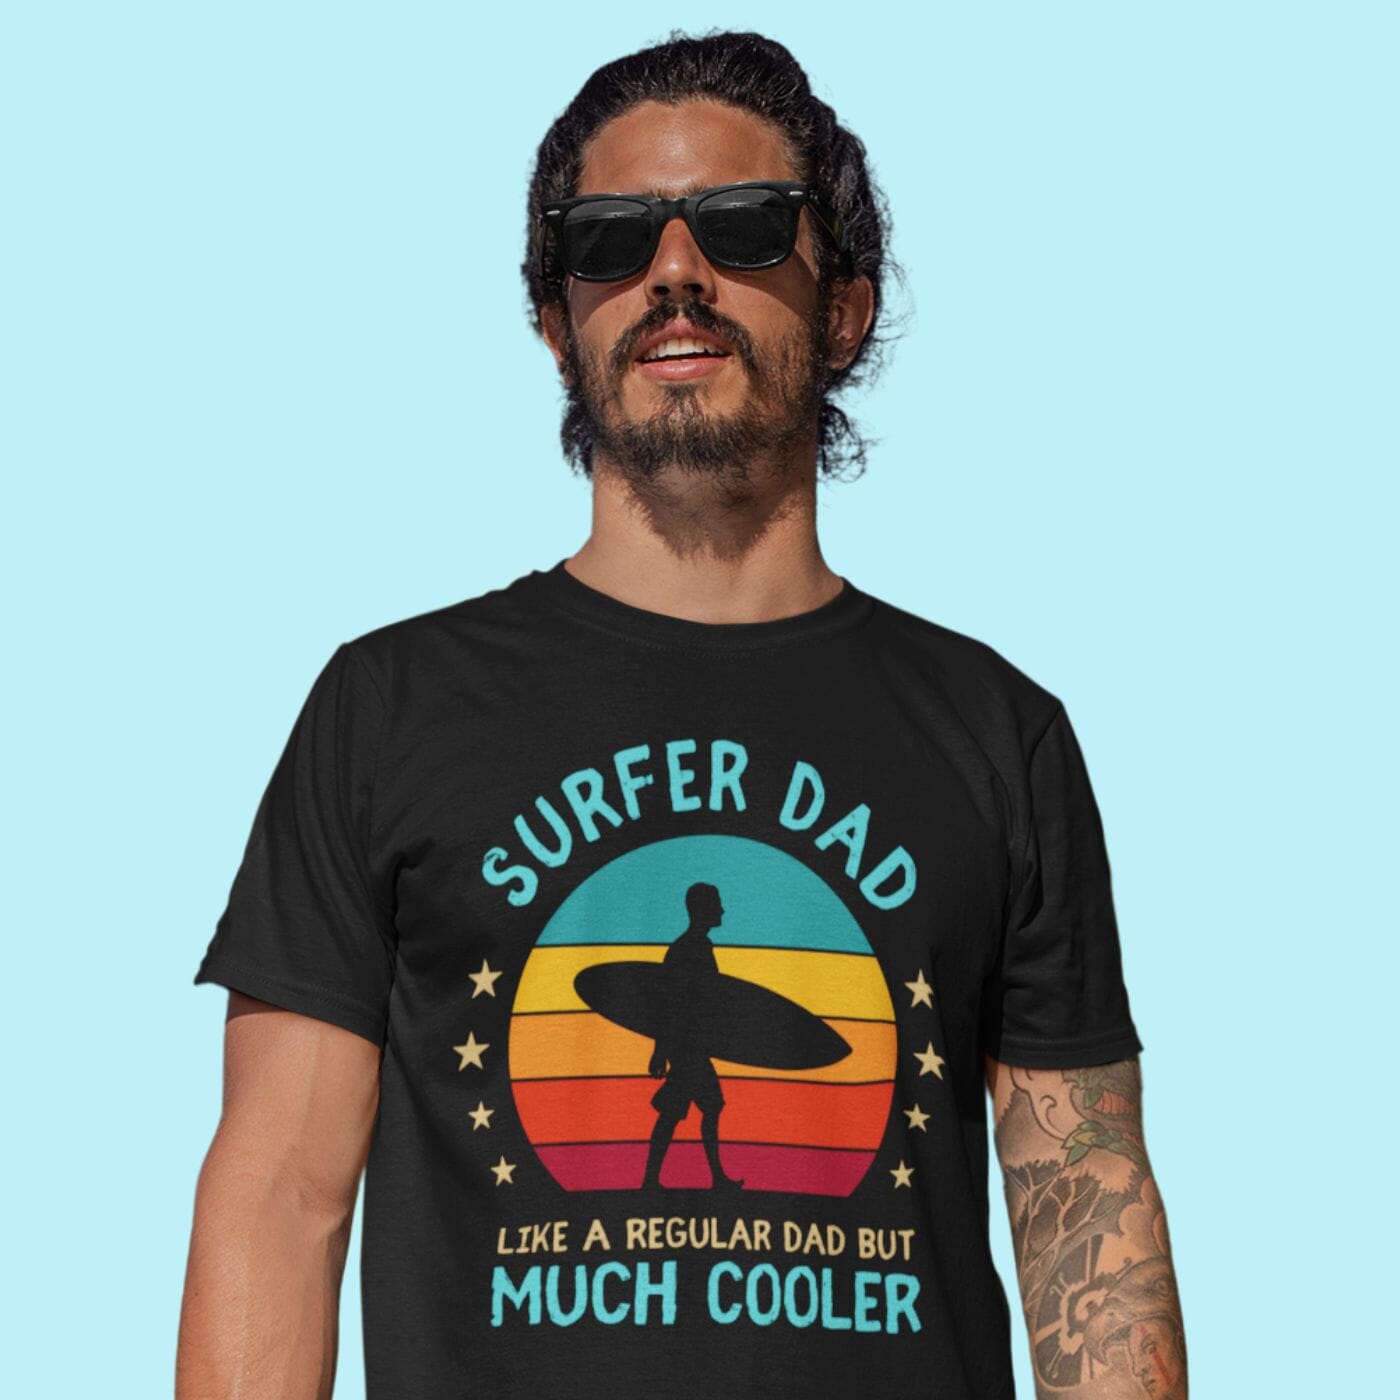 Outdoor Clothing - DecksyDesigns - T-shirts, Mugs & Novelty Personalised Gifts, Australia